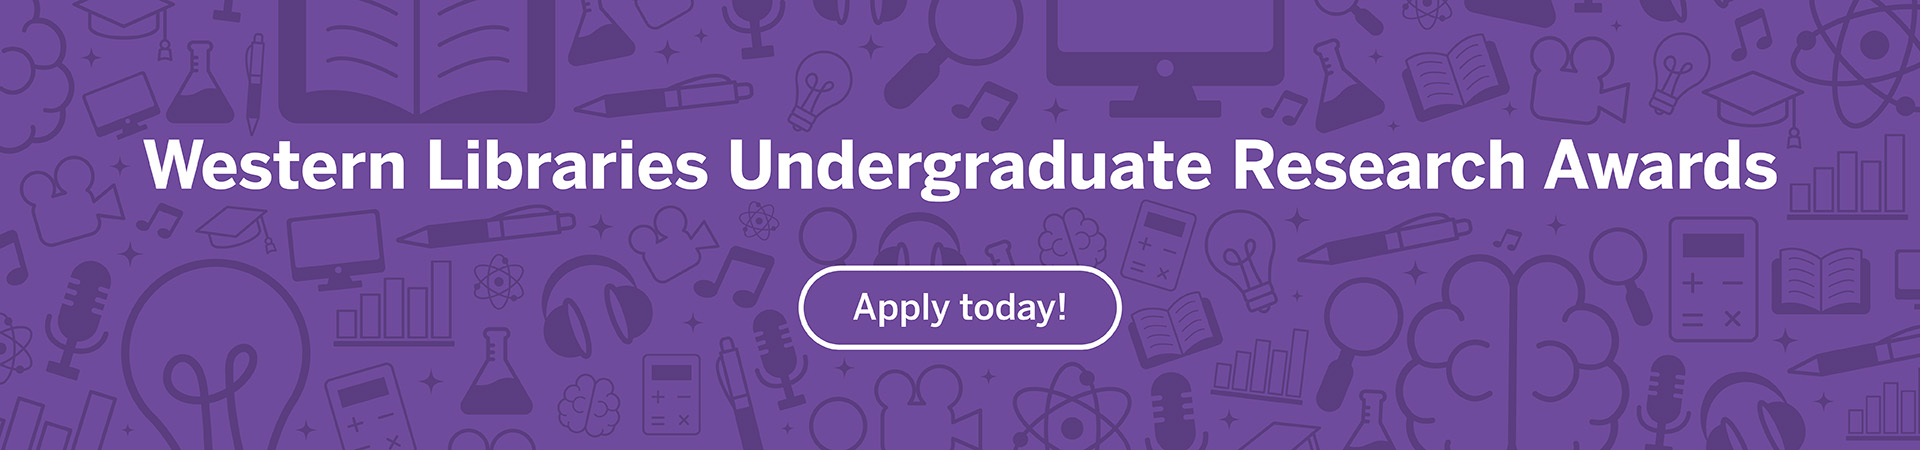 Western Libraries Undergraduate Research Awards - Apply Today